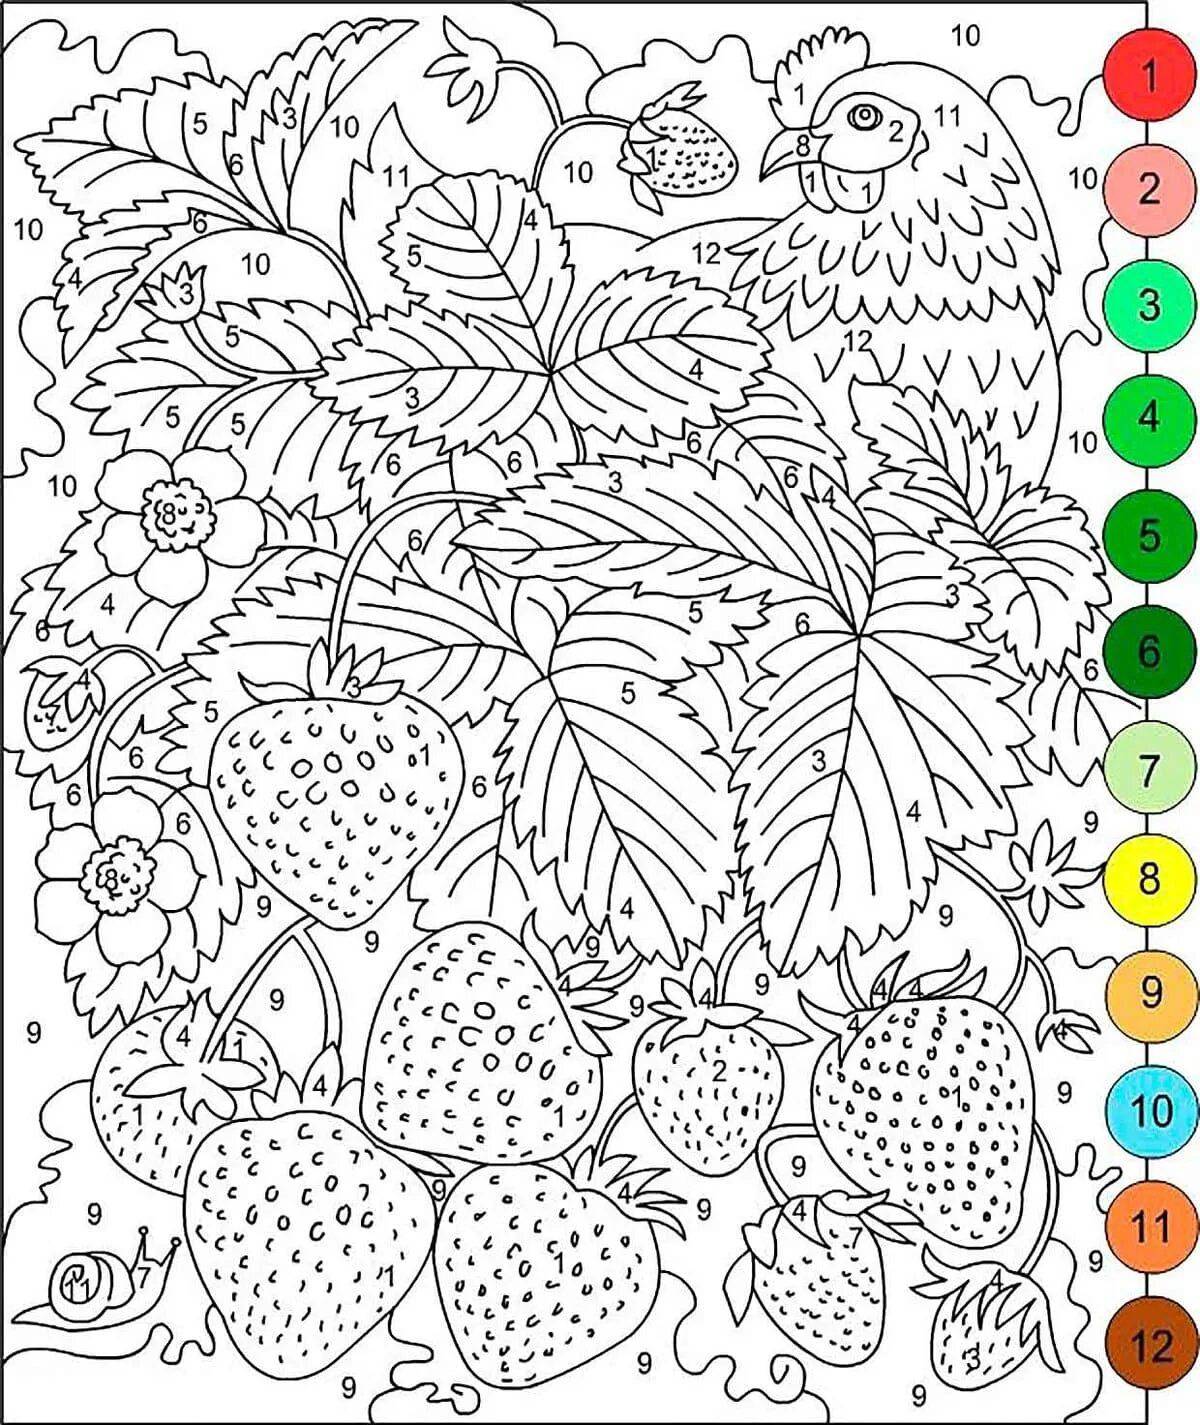 Attractive strawberry number coloring game